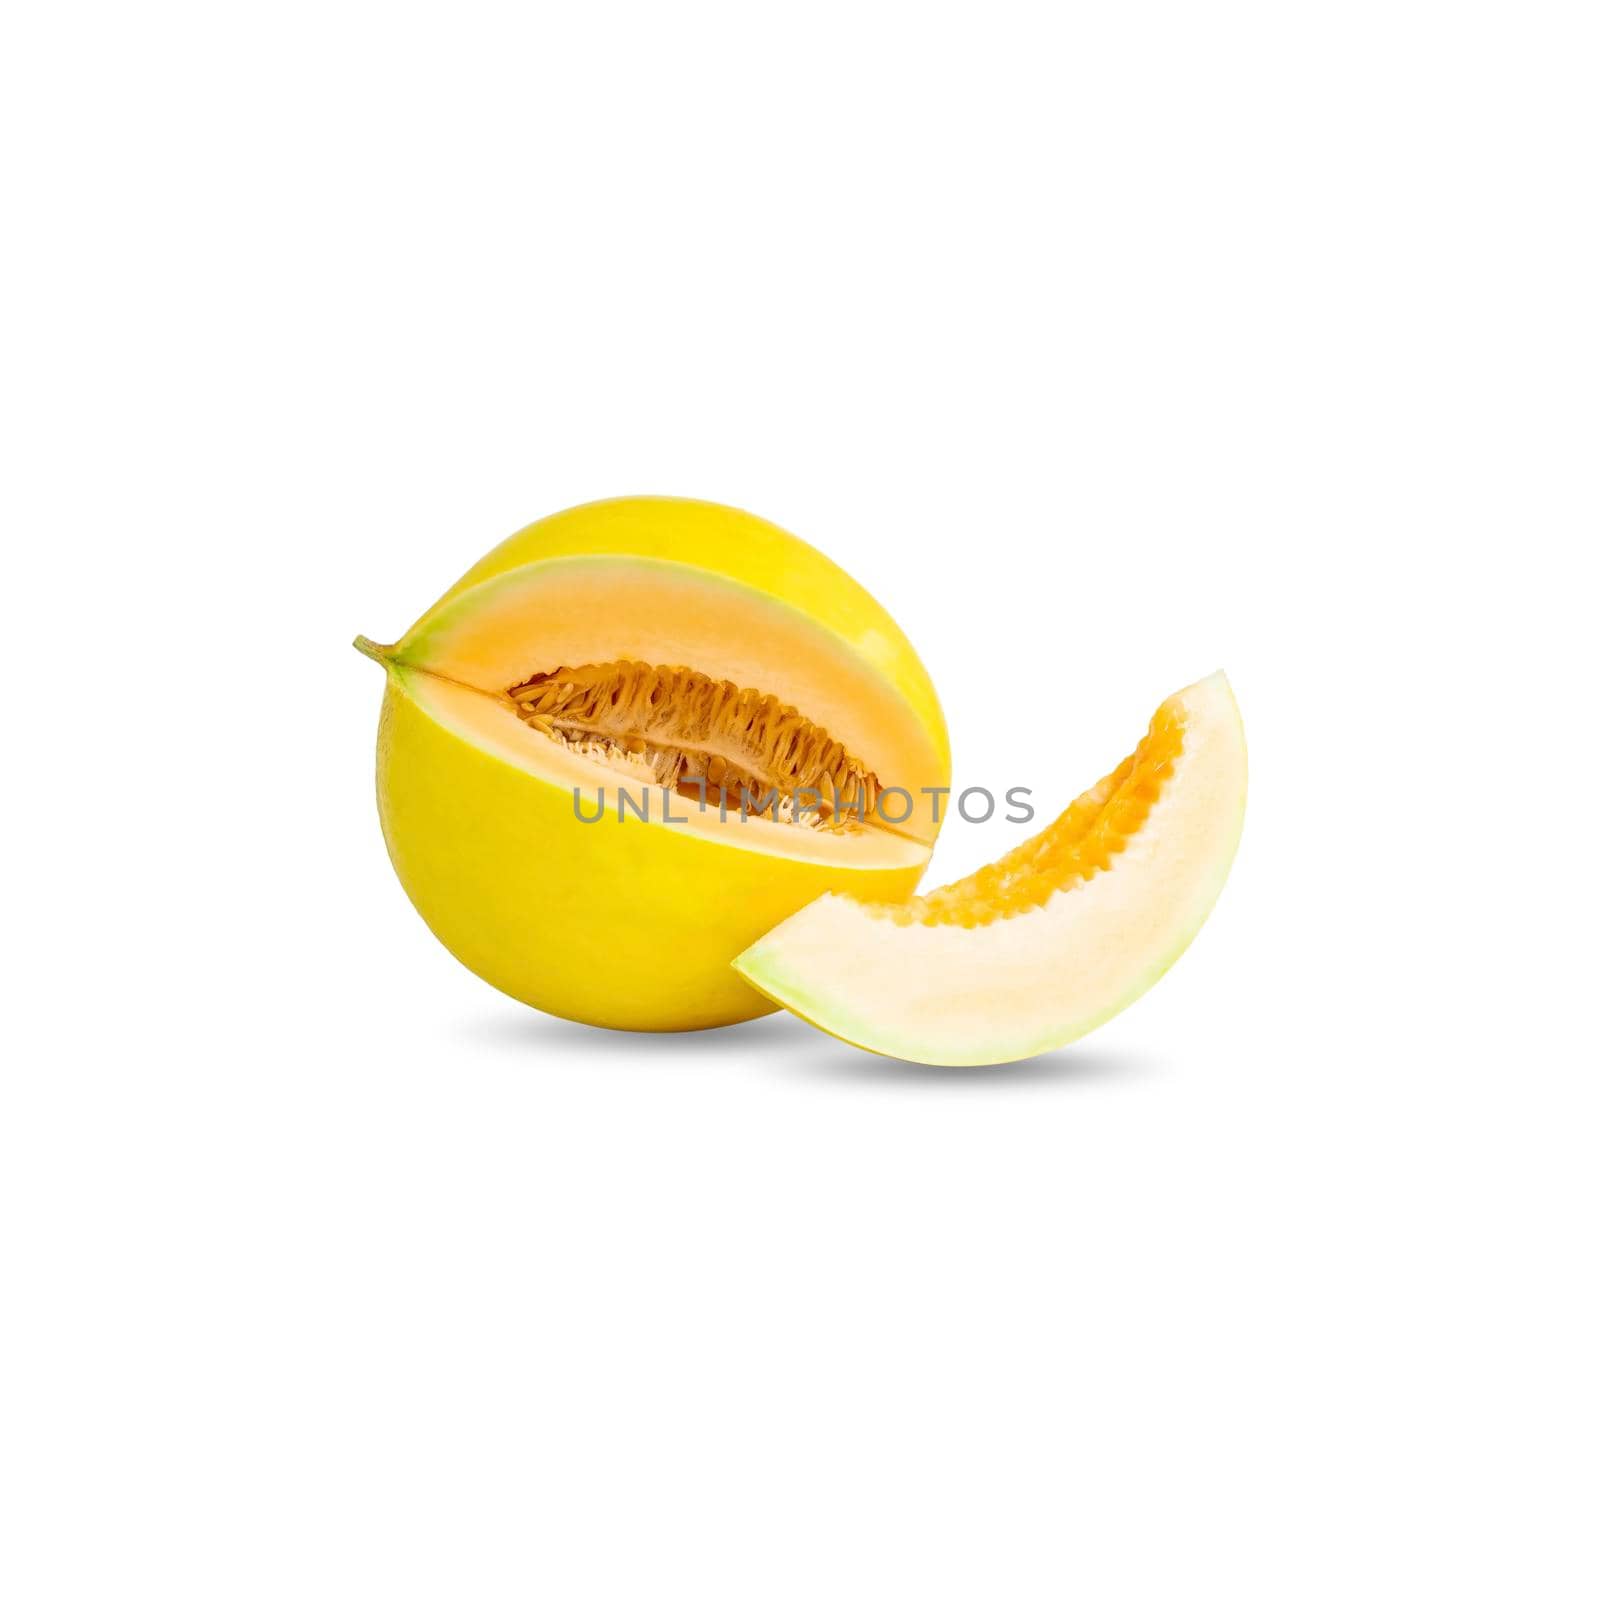 One cantaloupe or melon yellow color and one piece on white background. by wattanaphob